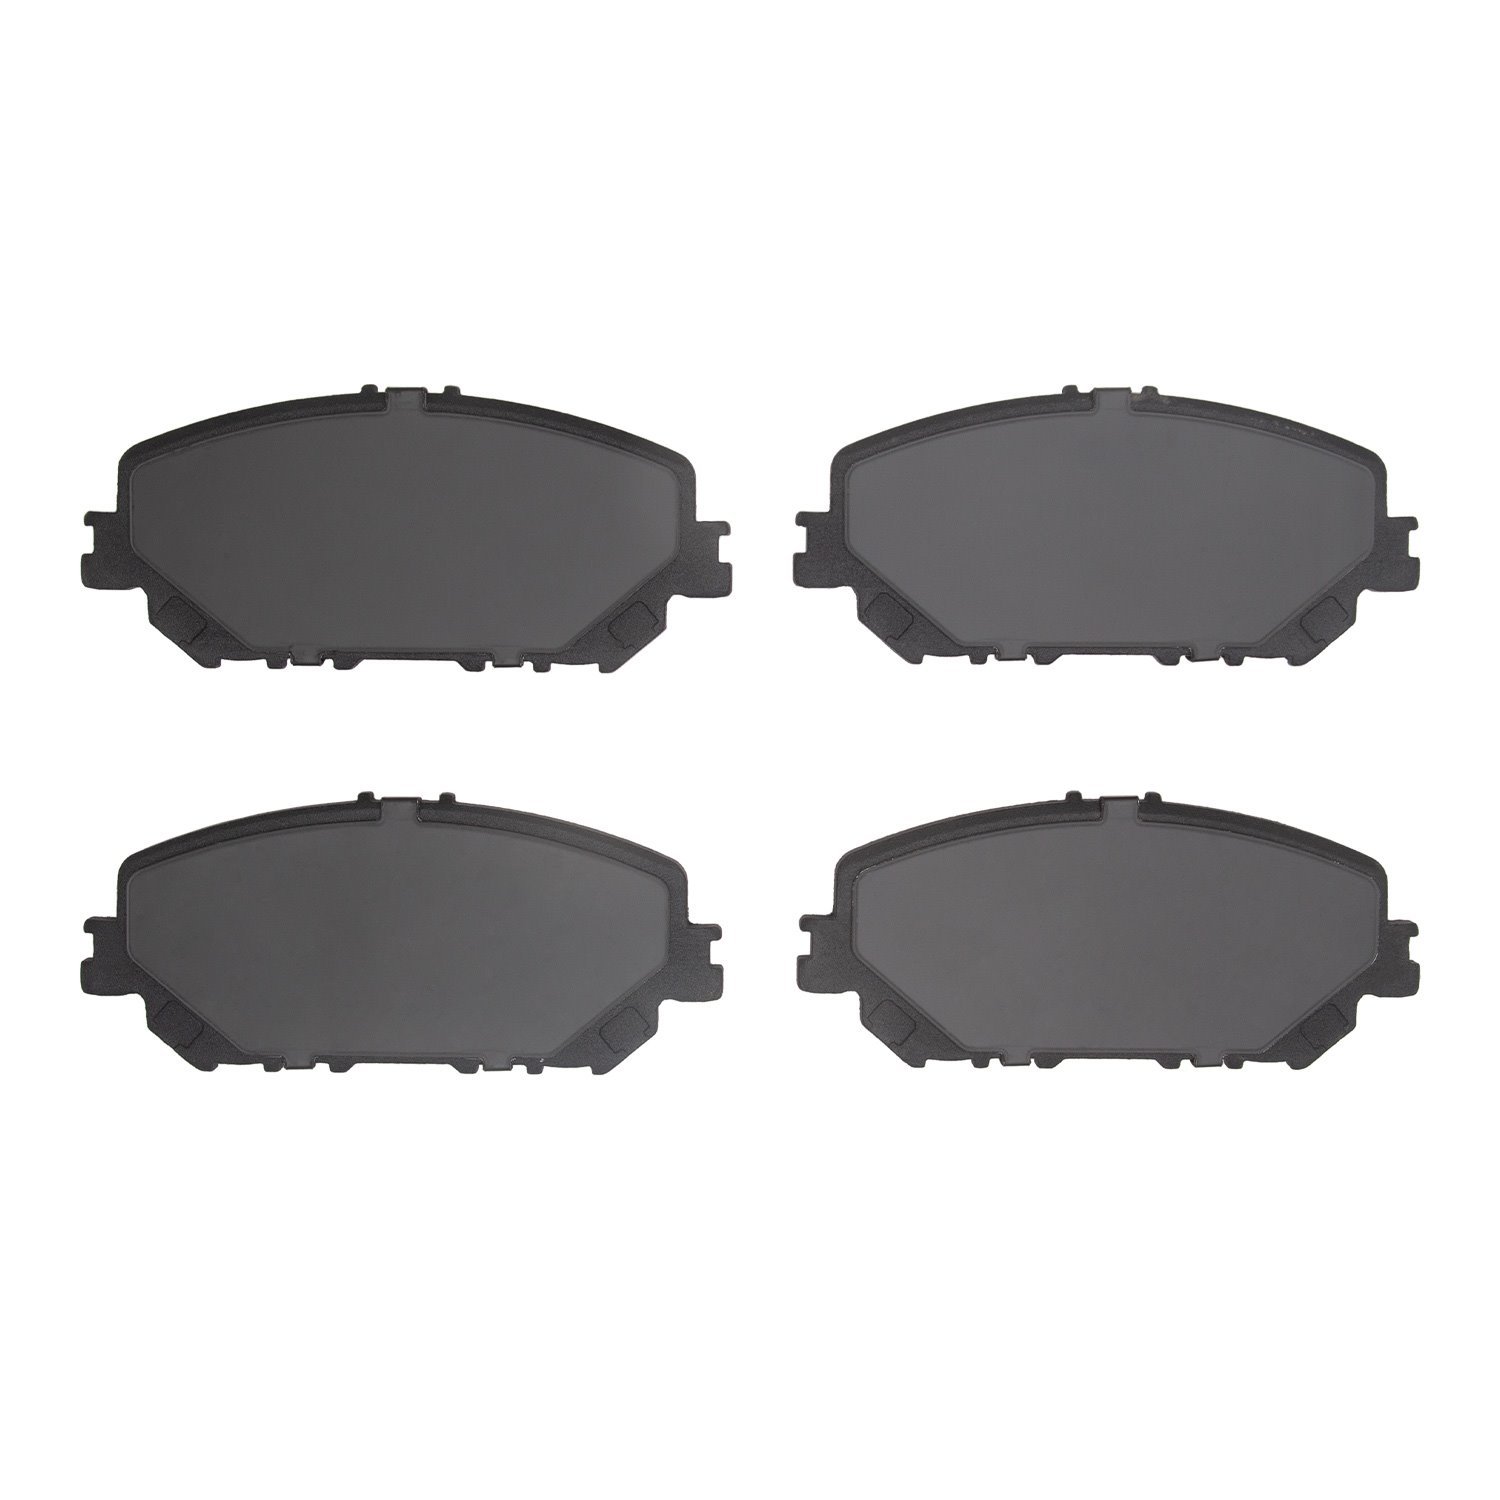 1551-2375-00 5000 Advanced Ceramic Brake Pads, Fits Select Infiniti/Nissan, Position: Front